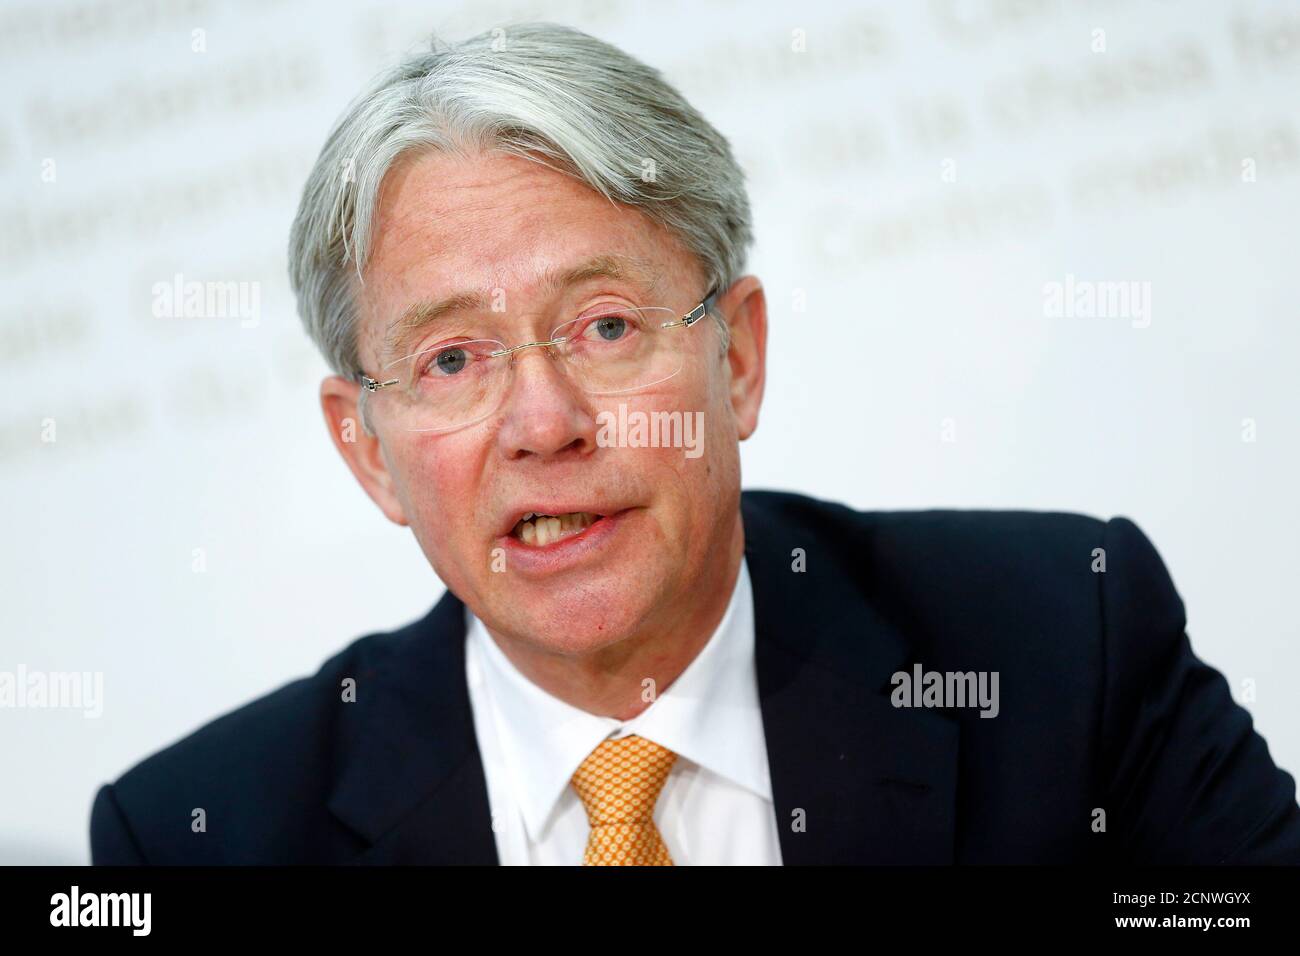 Thomas Bauer High Resolution Stock Photography and Images - Alamy